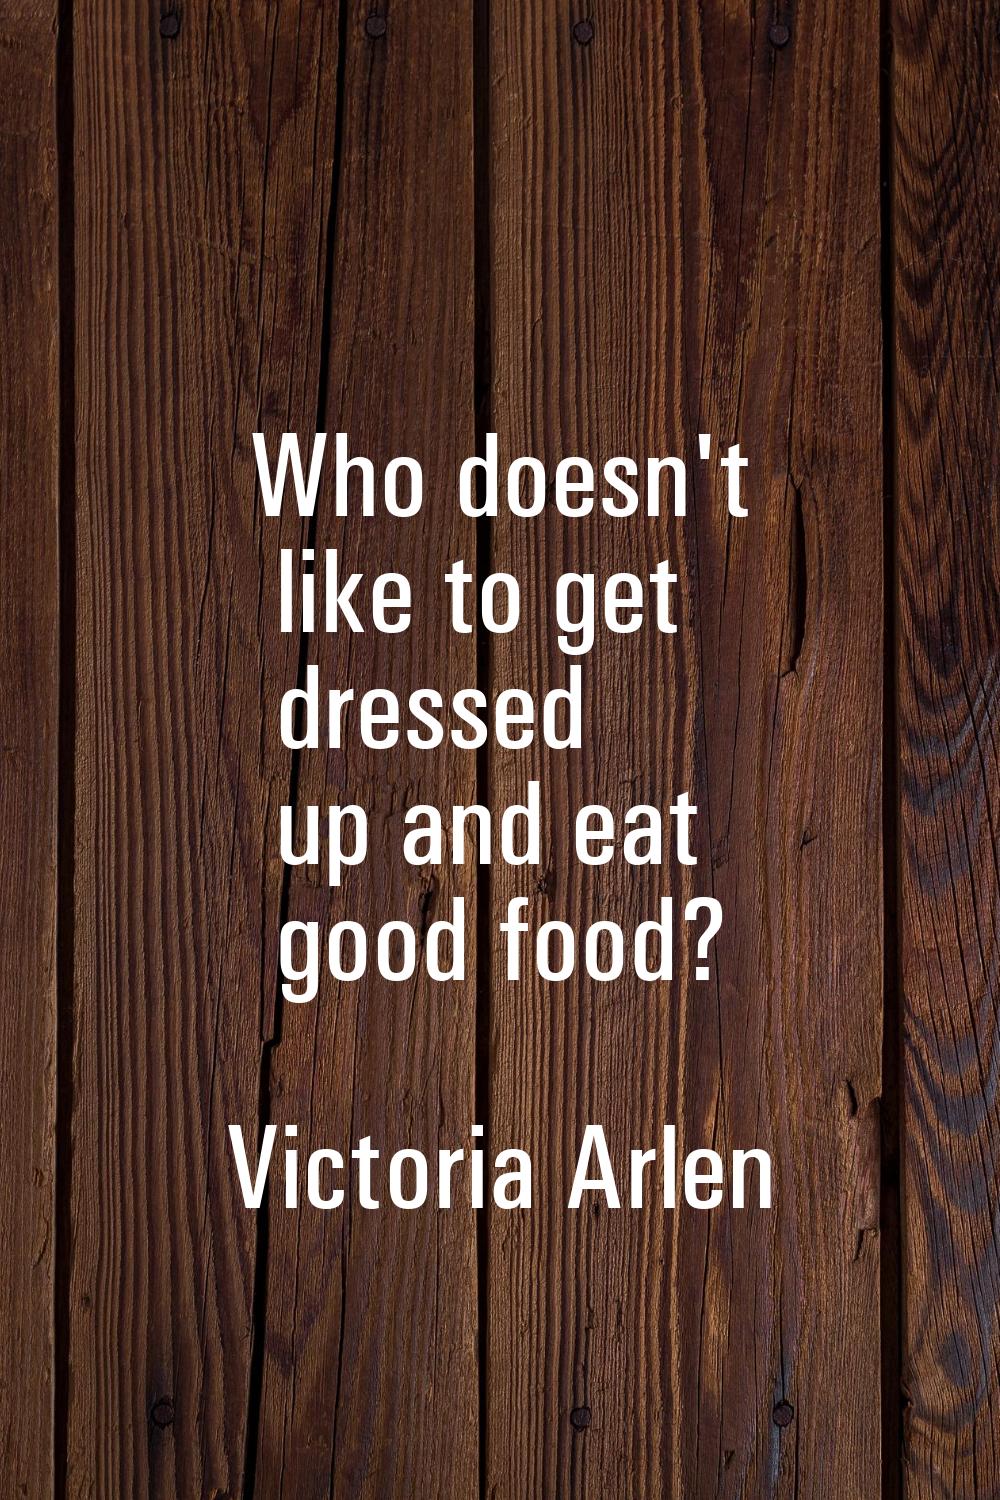 Who doesn't like to get dressed up and eat good food?